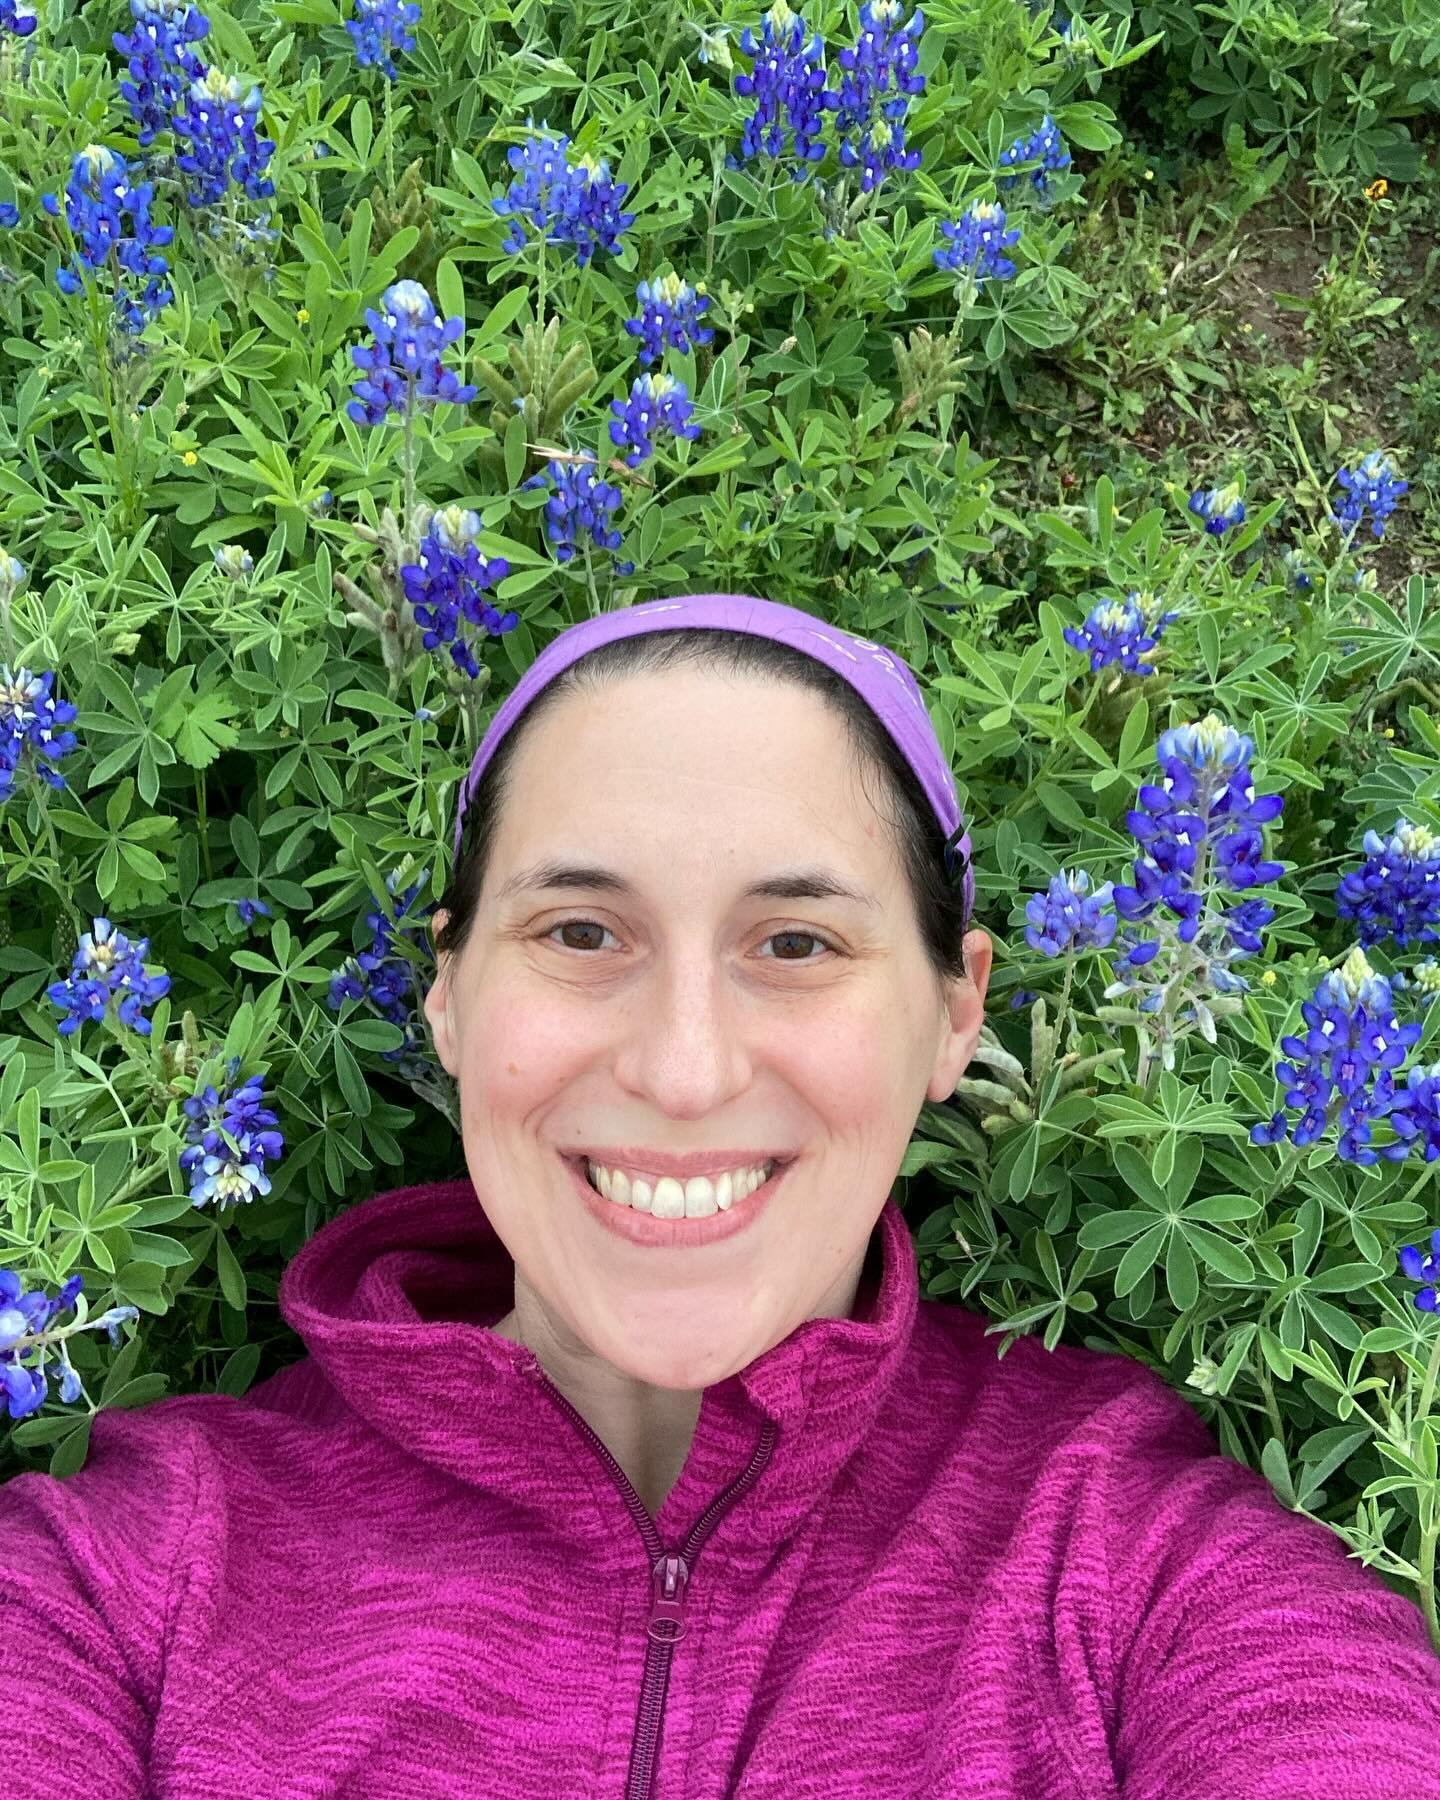 Nature is one of my favorite places to play!@memorialparkconservancy  and @houstonbotanic are my favorites, and finding bluebonnets with on my guest walk with @urbanpaths was a blast!